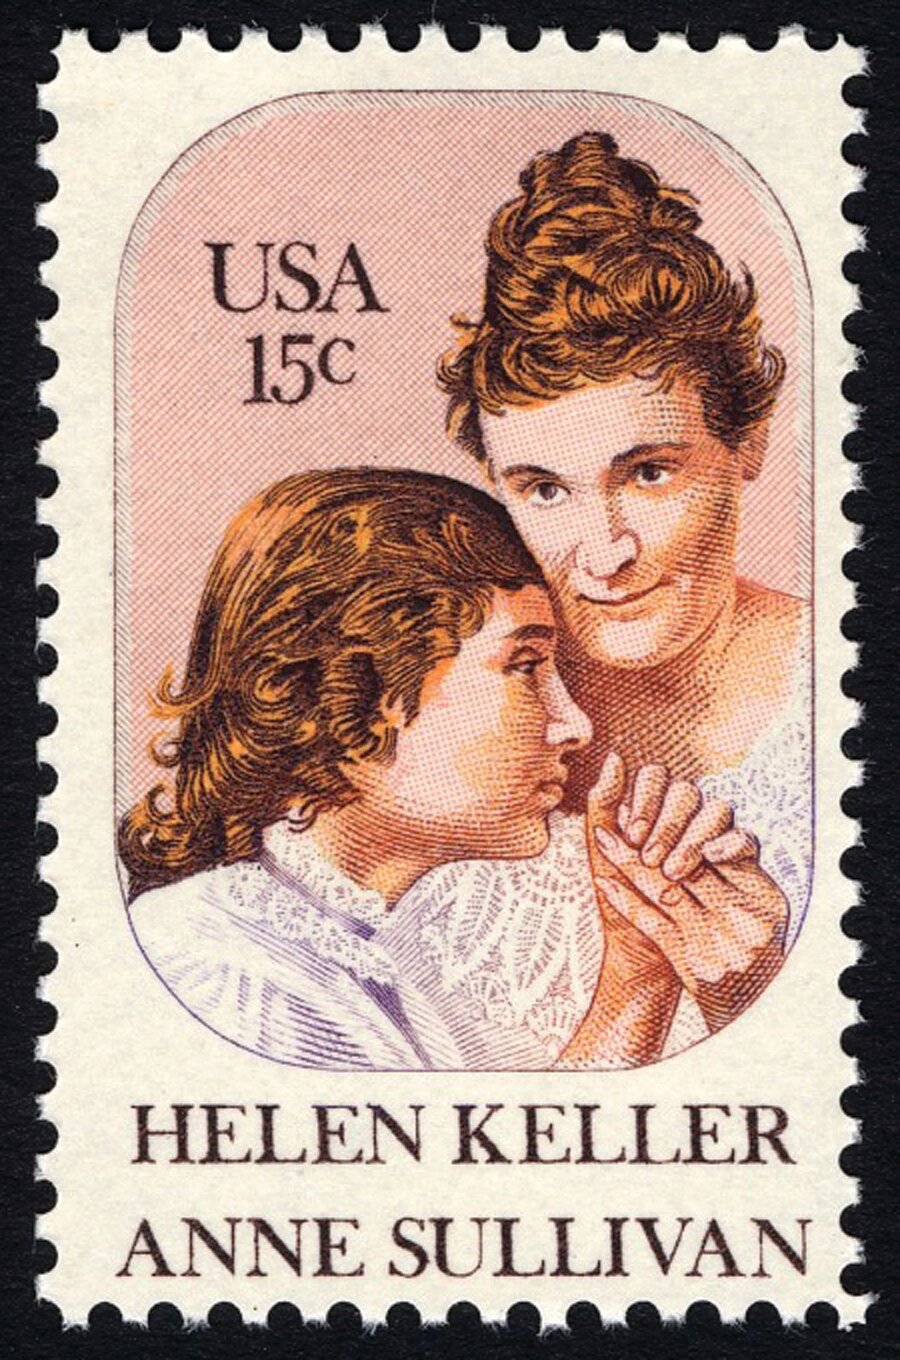 A stamp issued in 1980 commemorated the 100th anniversary of Helen Keller’s birth.